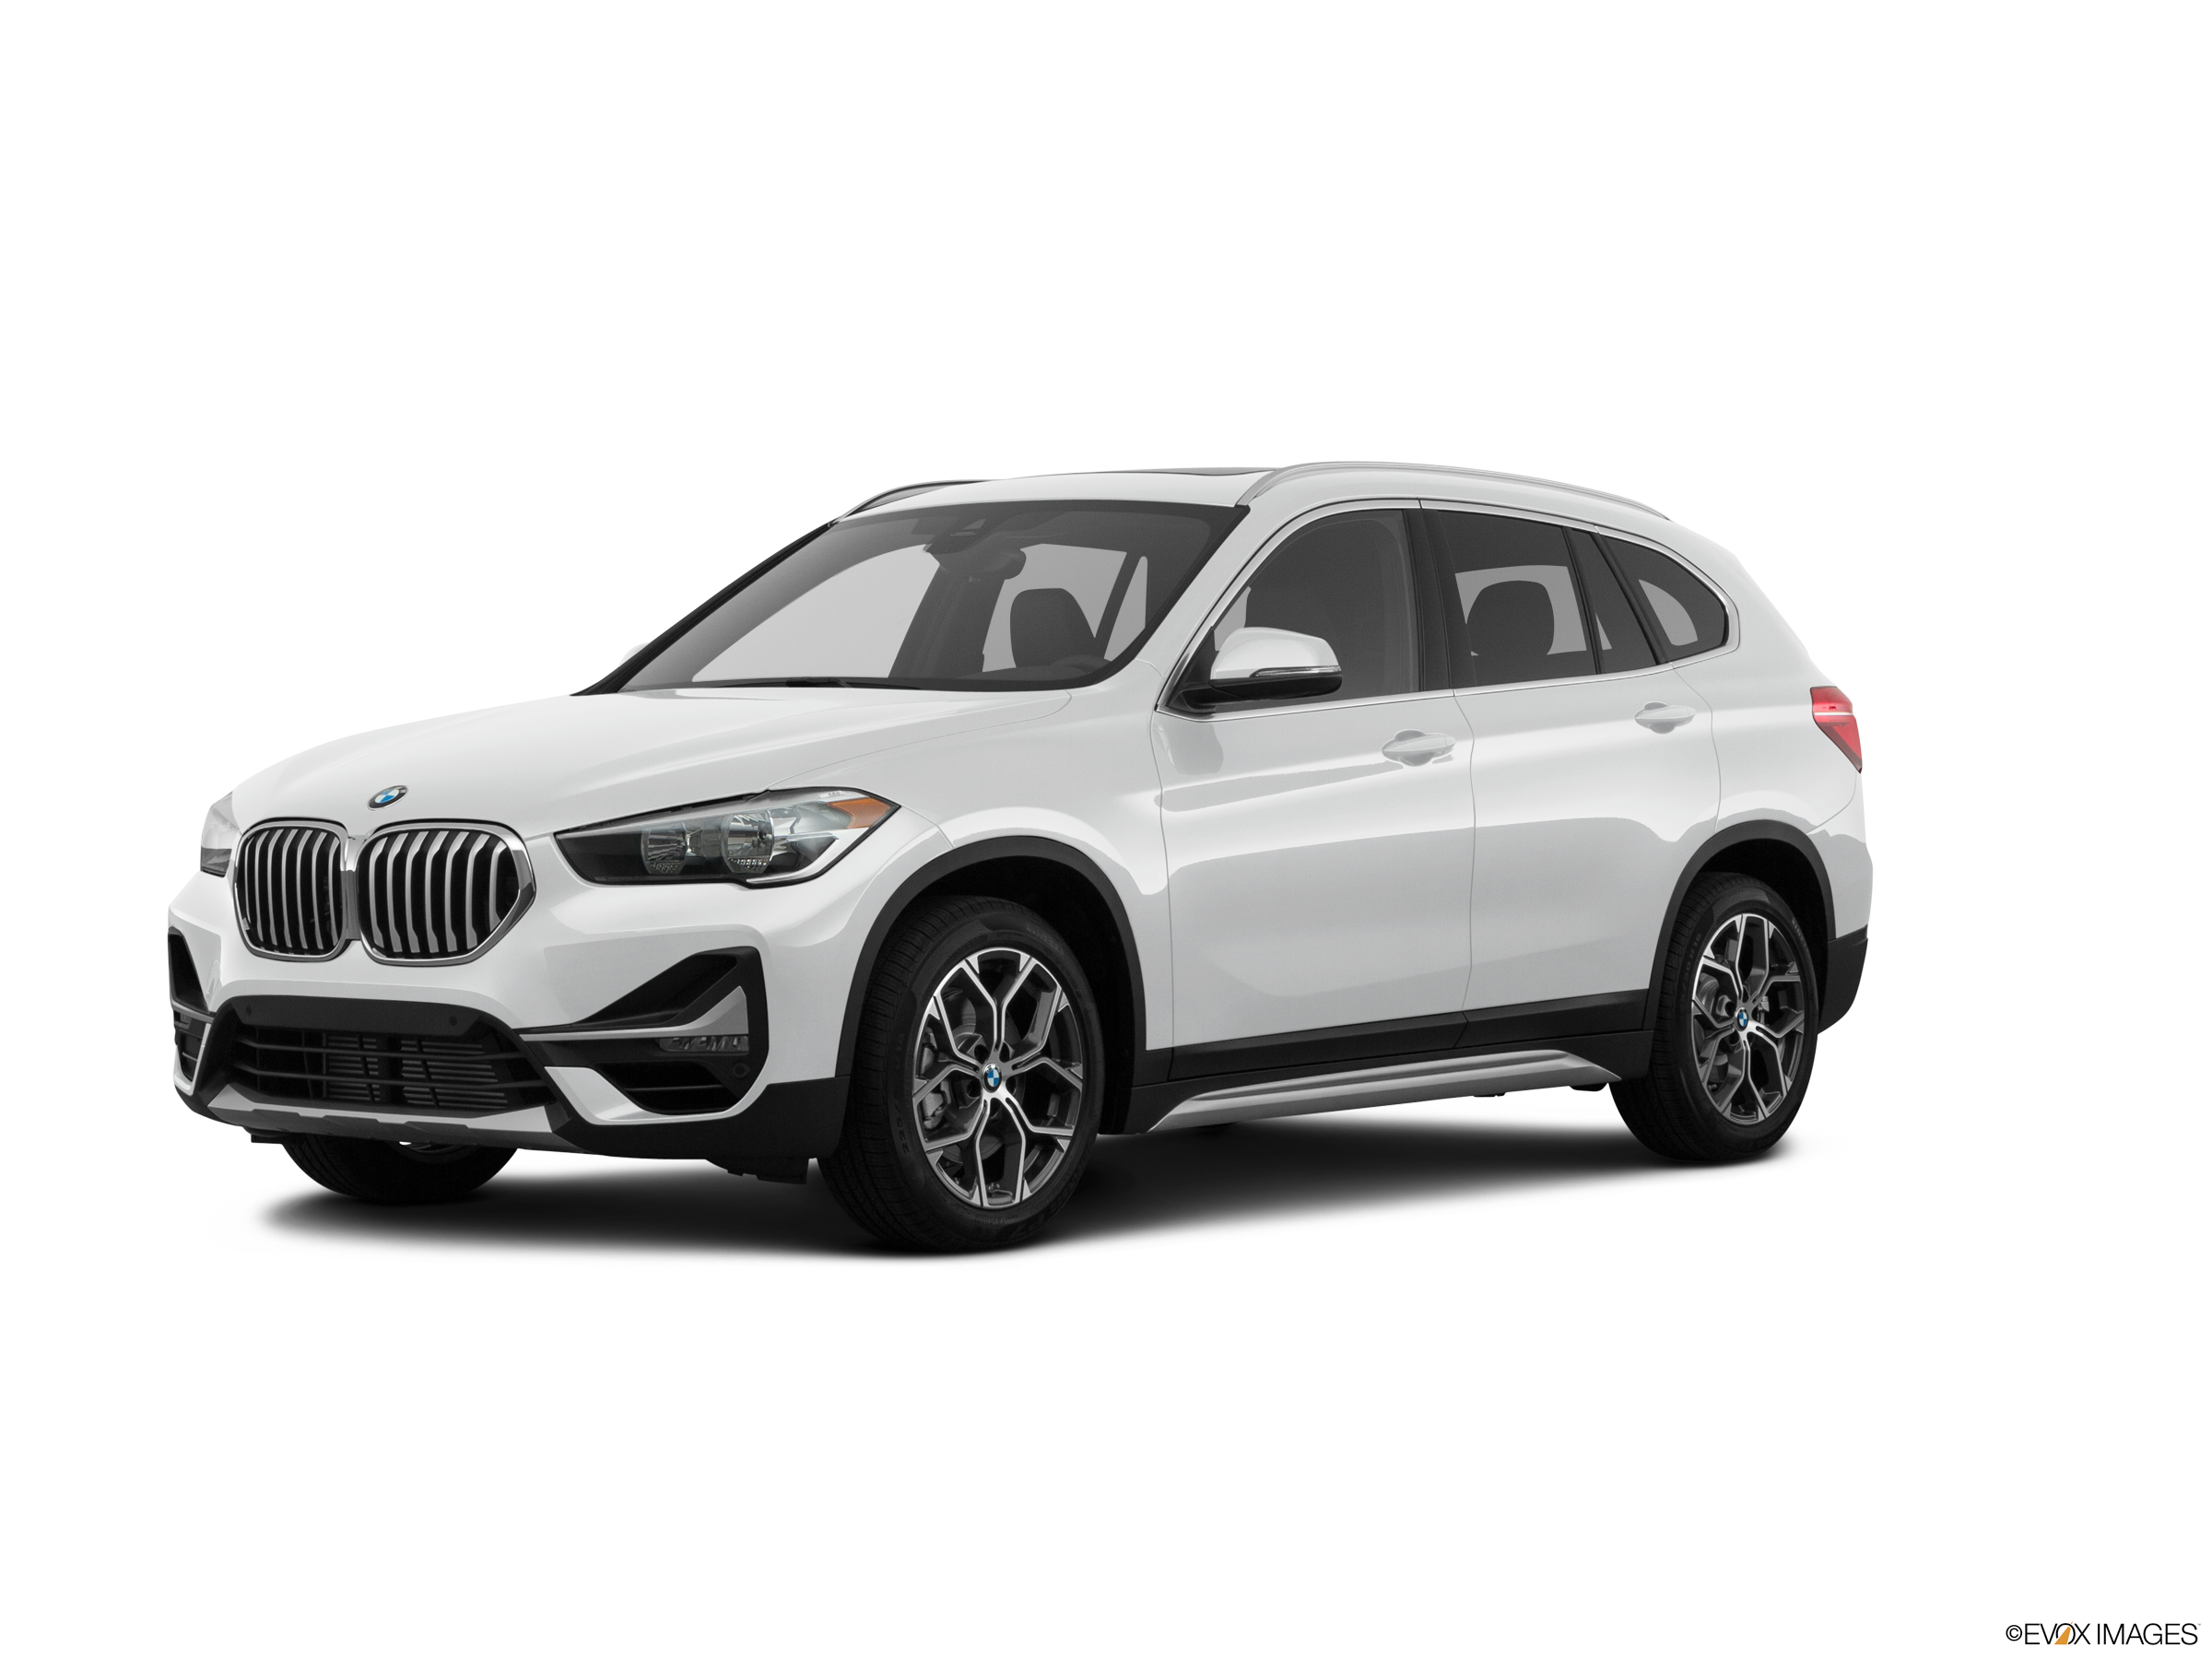 New 2021 BMW X1 Reviews, Pricing & Specs | Kelley Blue Book